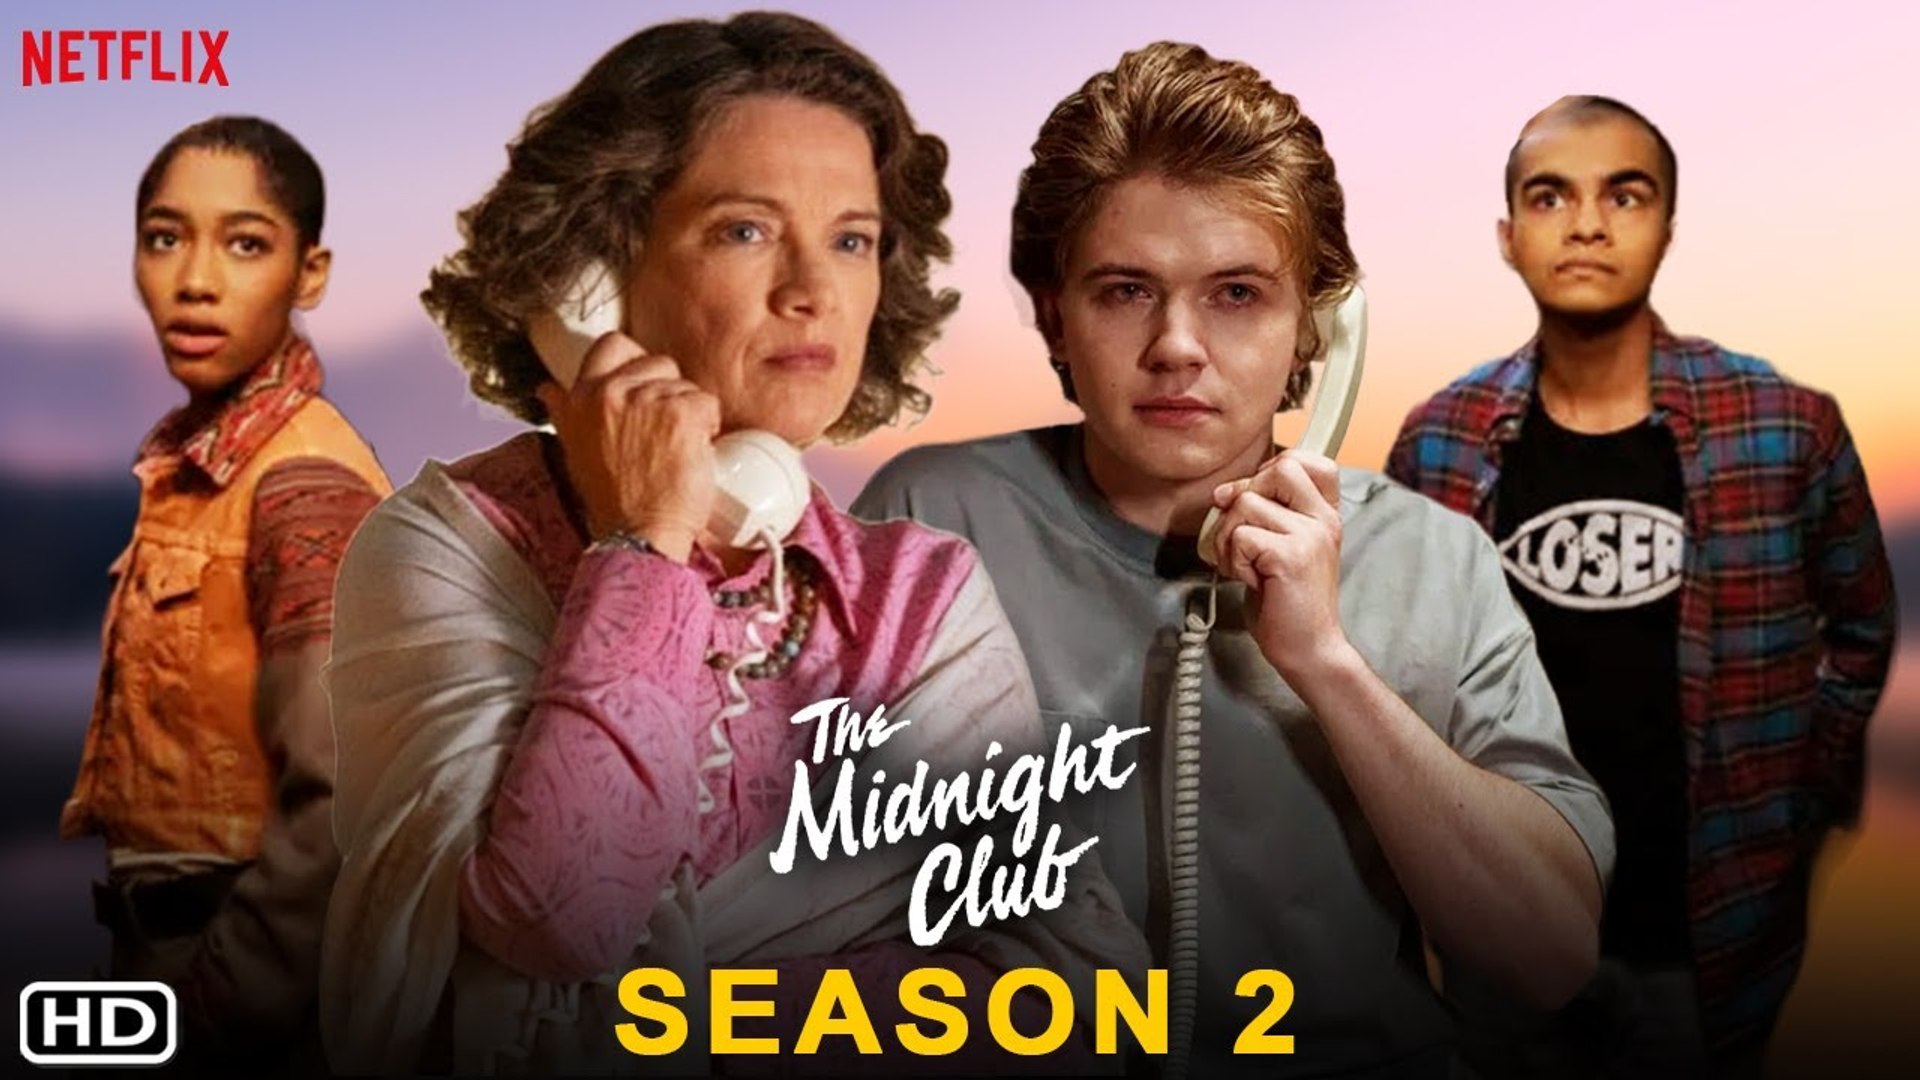 The Midnight Season 2 Release Date, Cast, Plot - theContenting